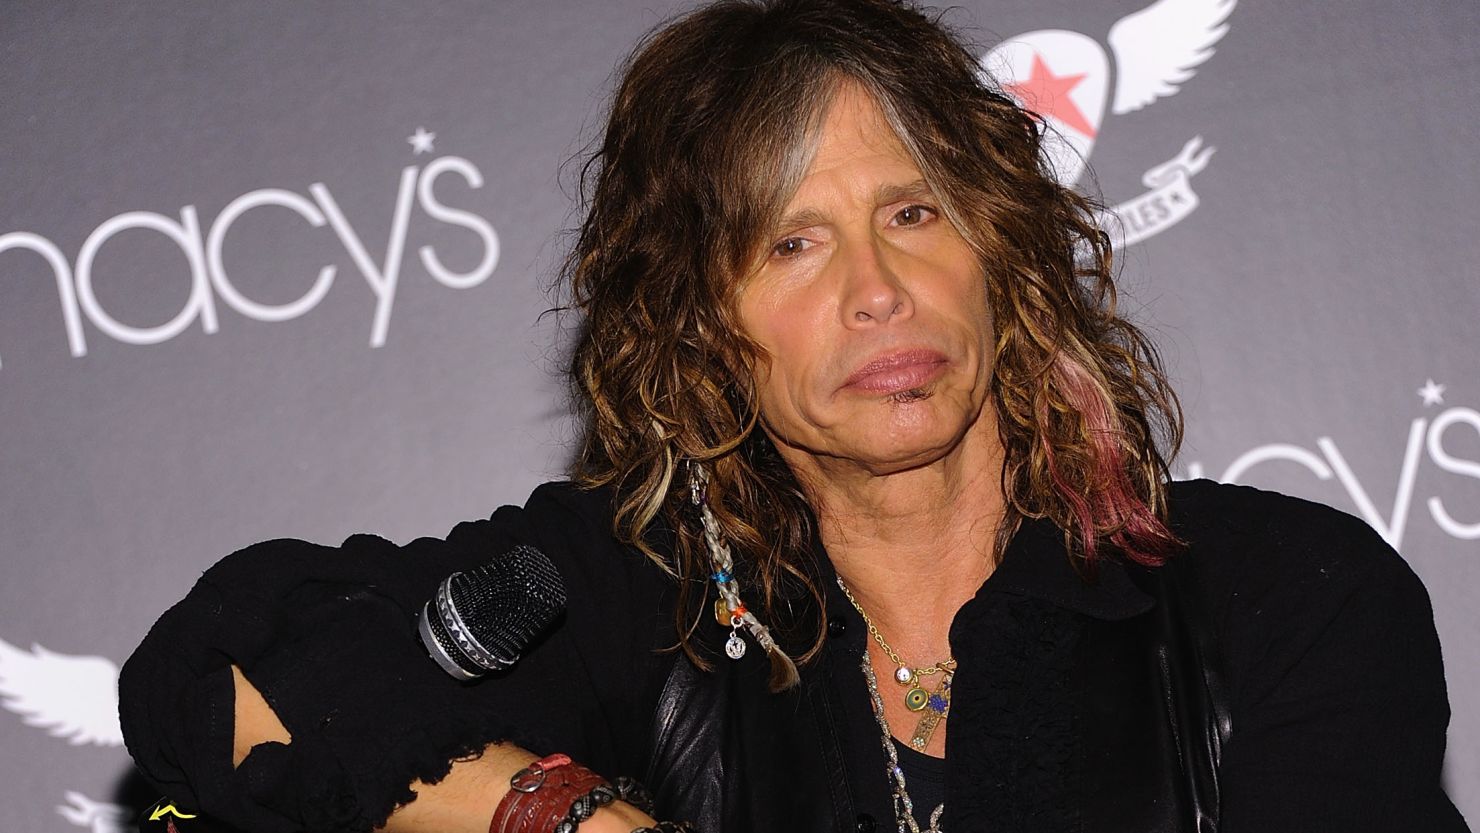 "I started to get sick, and I just fell on my face," Steven Tyler said. "I just passed out."